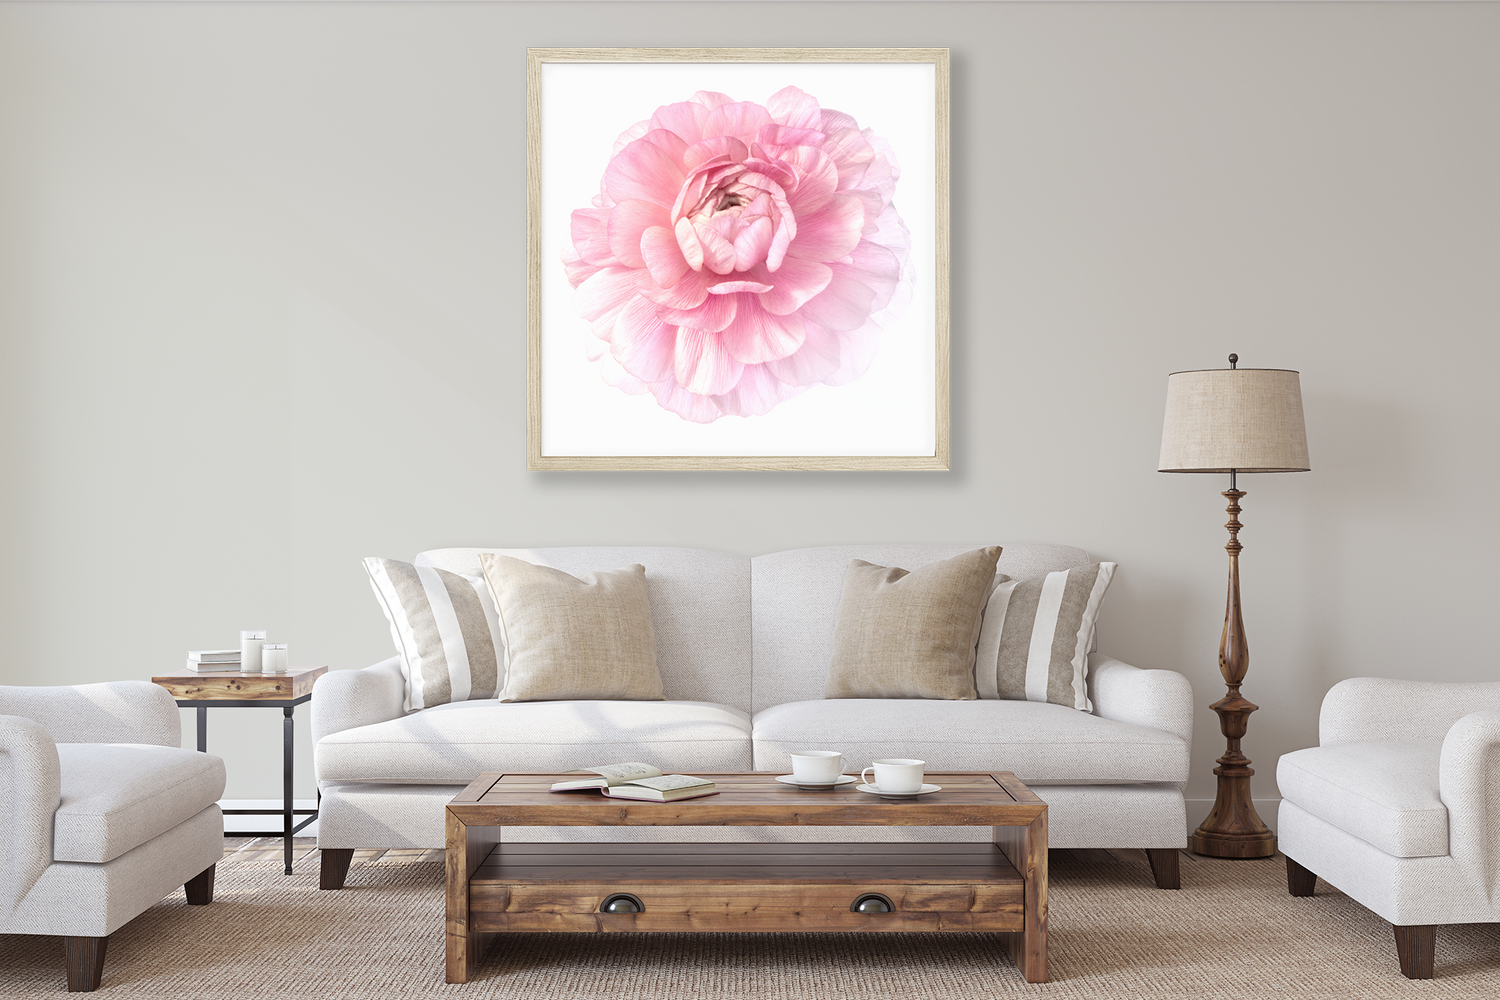 Large Fine Art Print of Pink Ranunculus on Lounge Room wall above cream coloured lounge